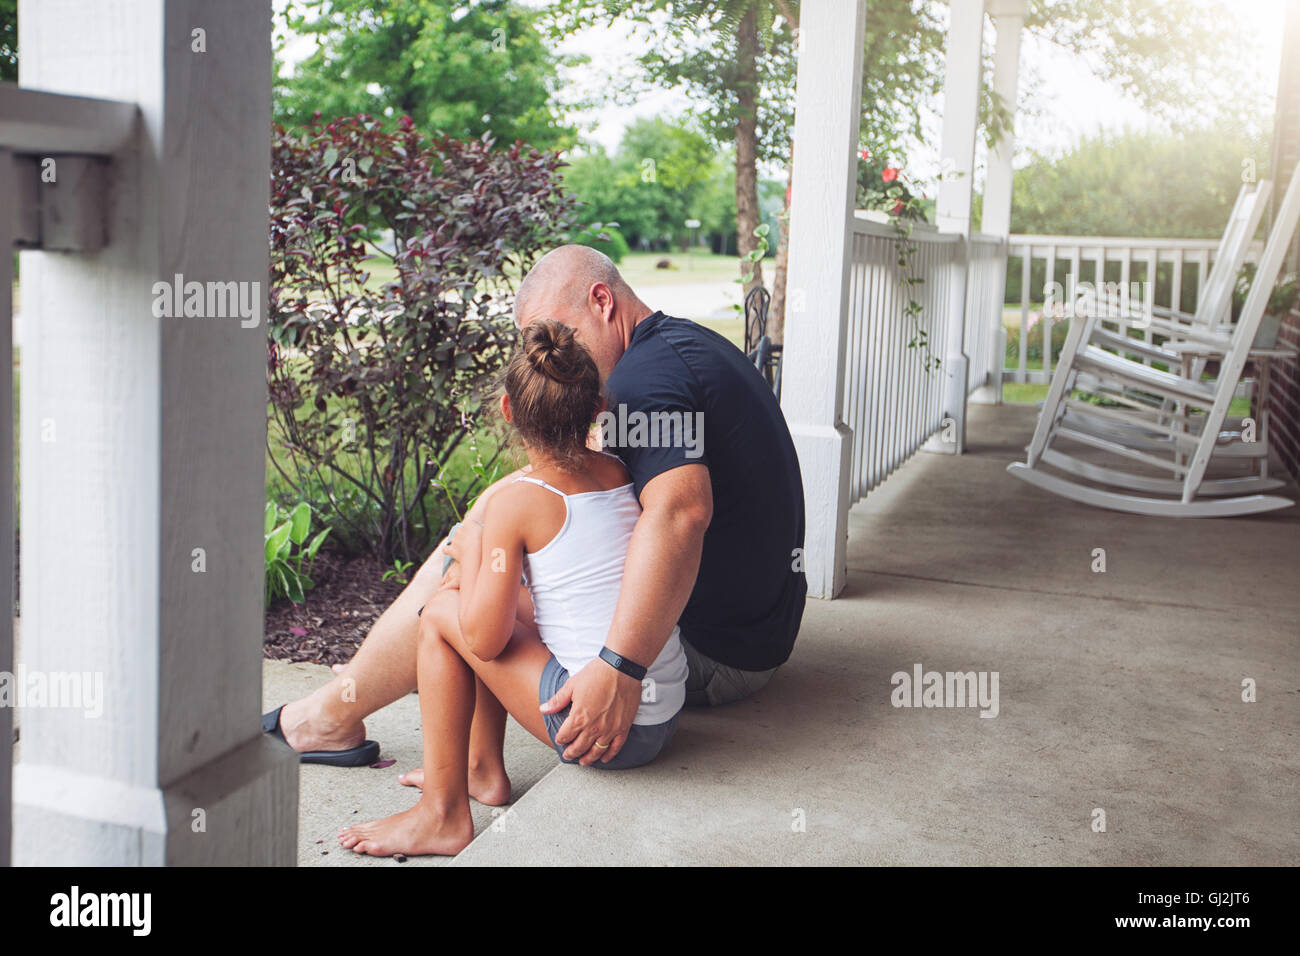 Rear view of father sitting on porch with arm around daughter Stock Photo